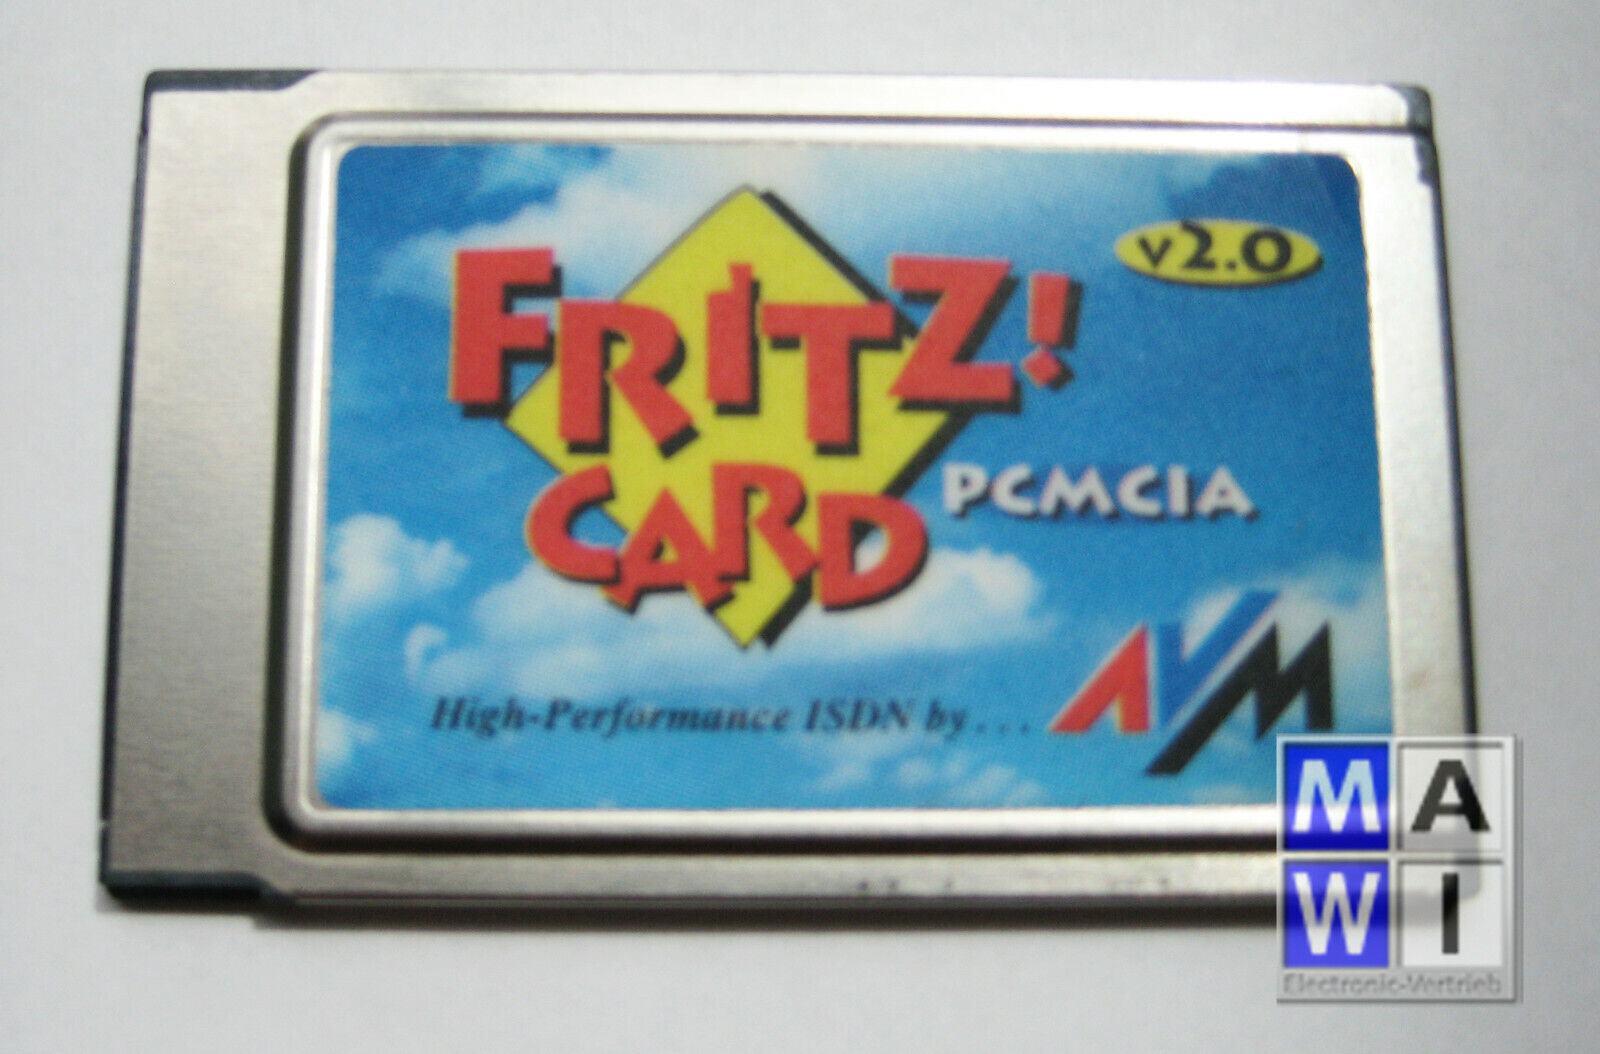 AVM Fritz Card Isdn v2.0 Pcmcia without Cable